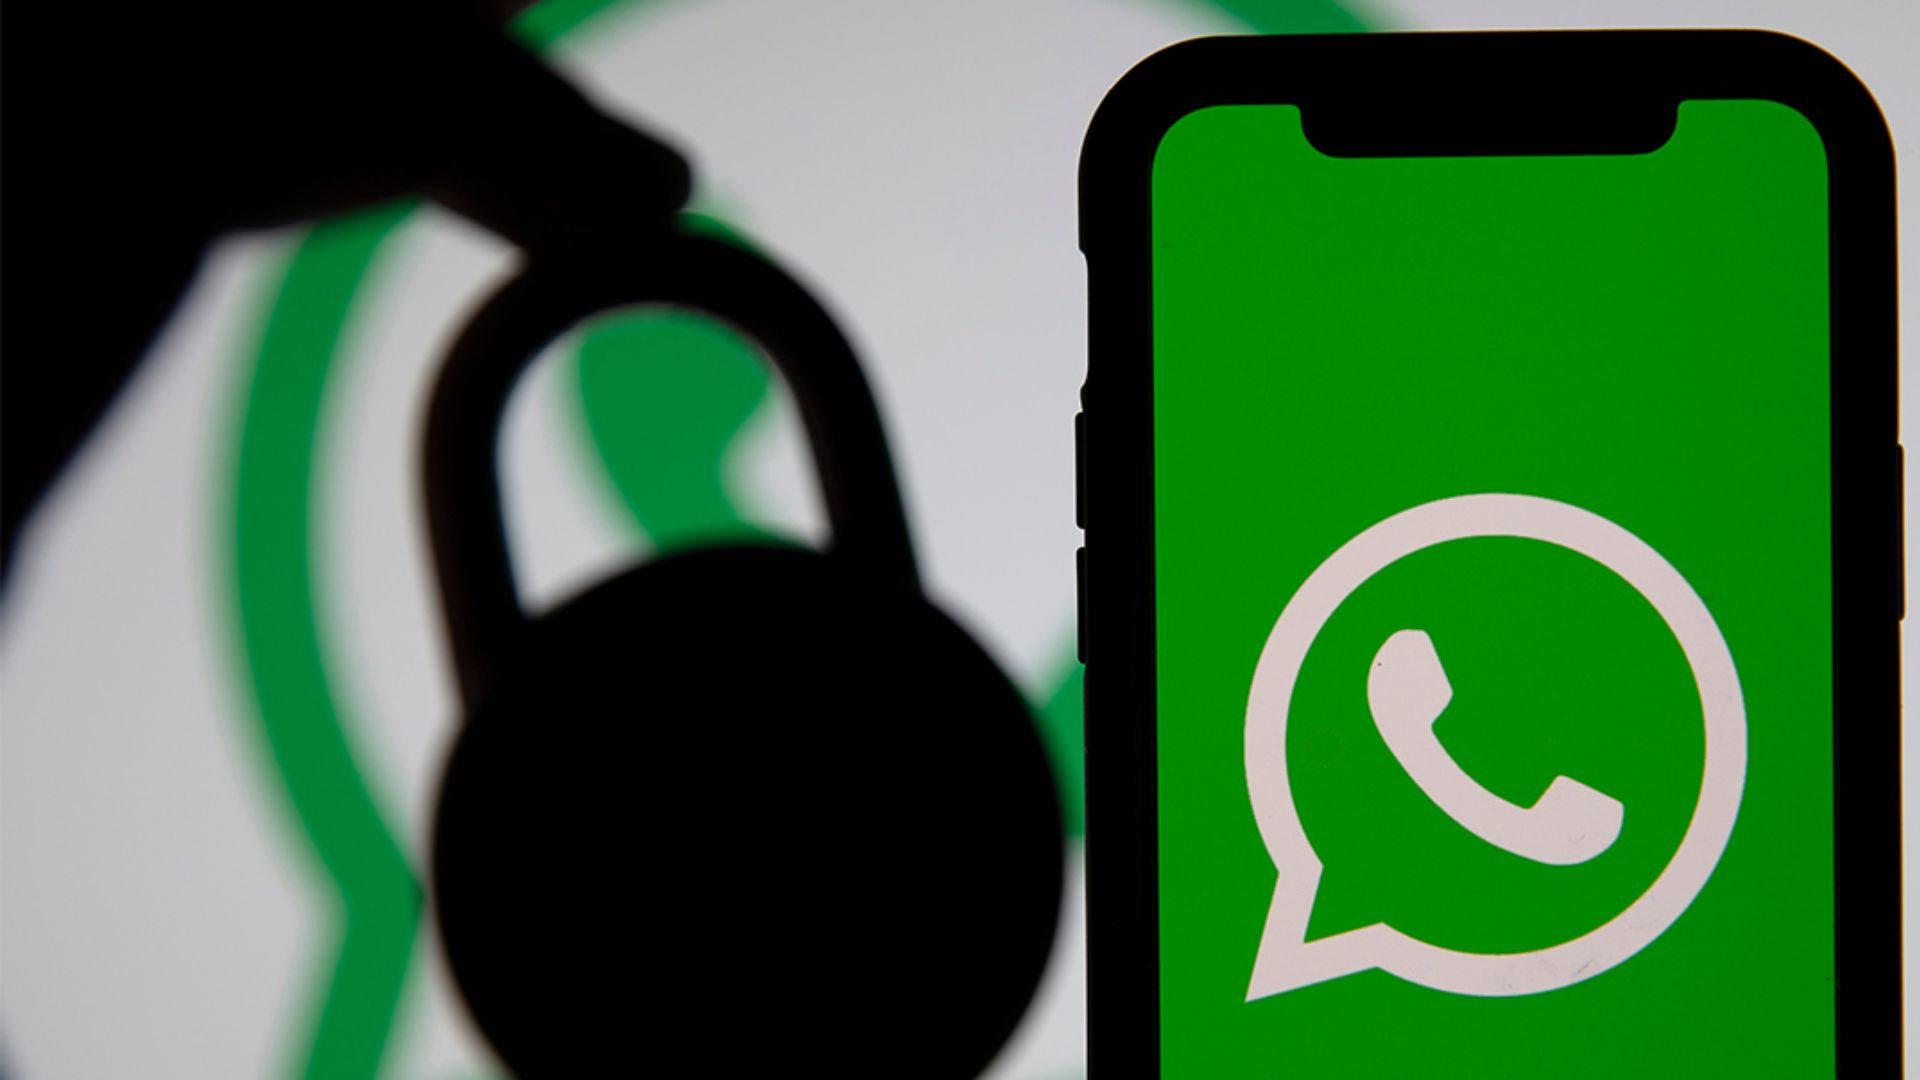 WhatsApp enhances security with a new 'chat lock' feature